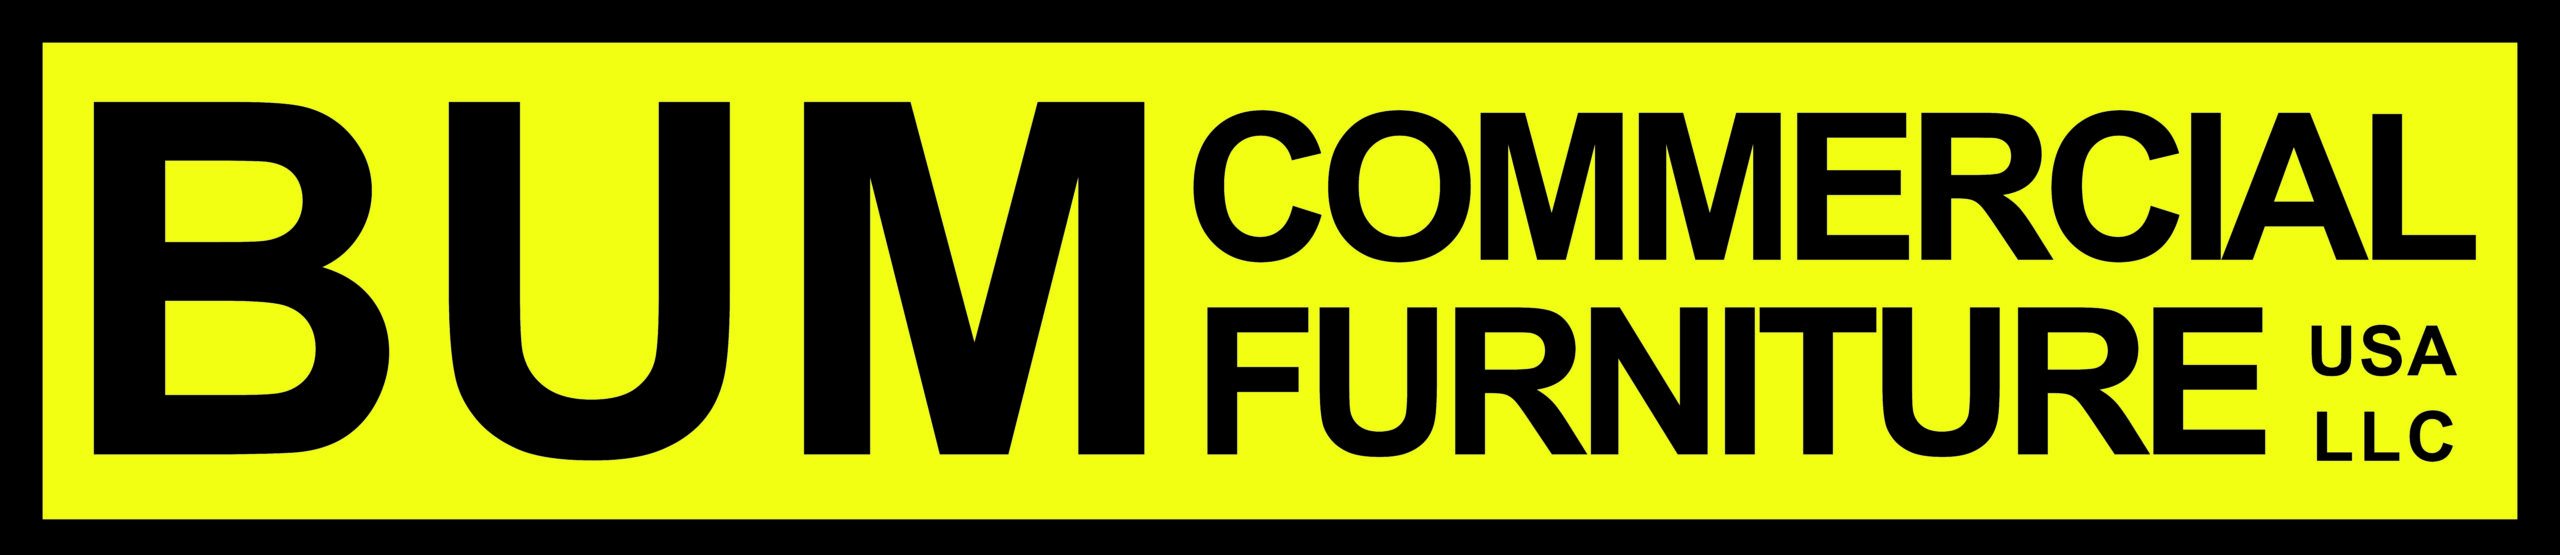 A yellow and black logo for the company furniture.